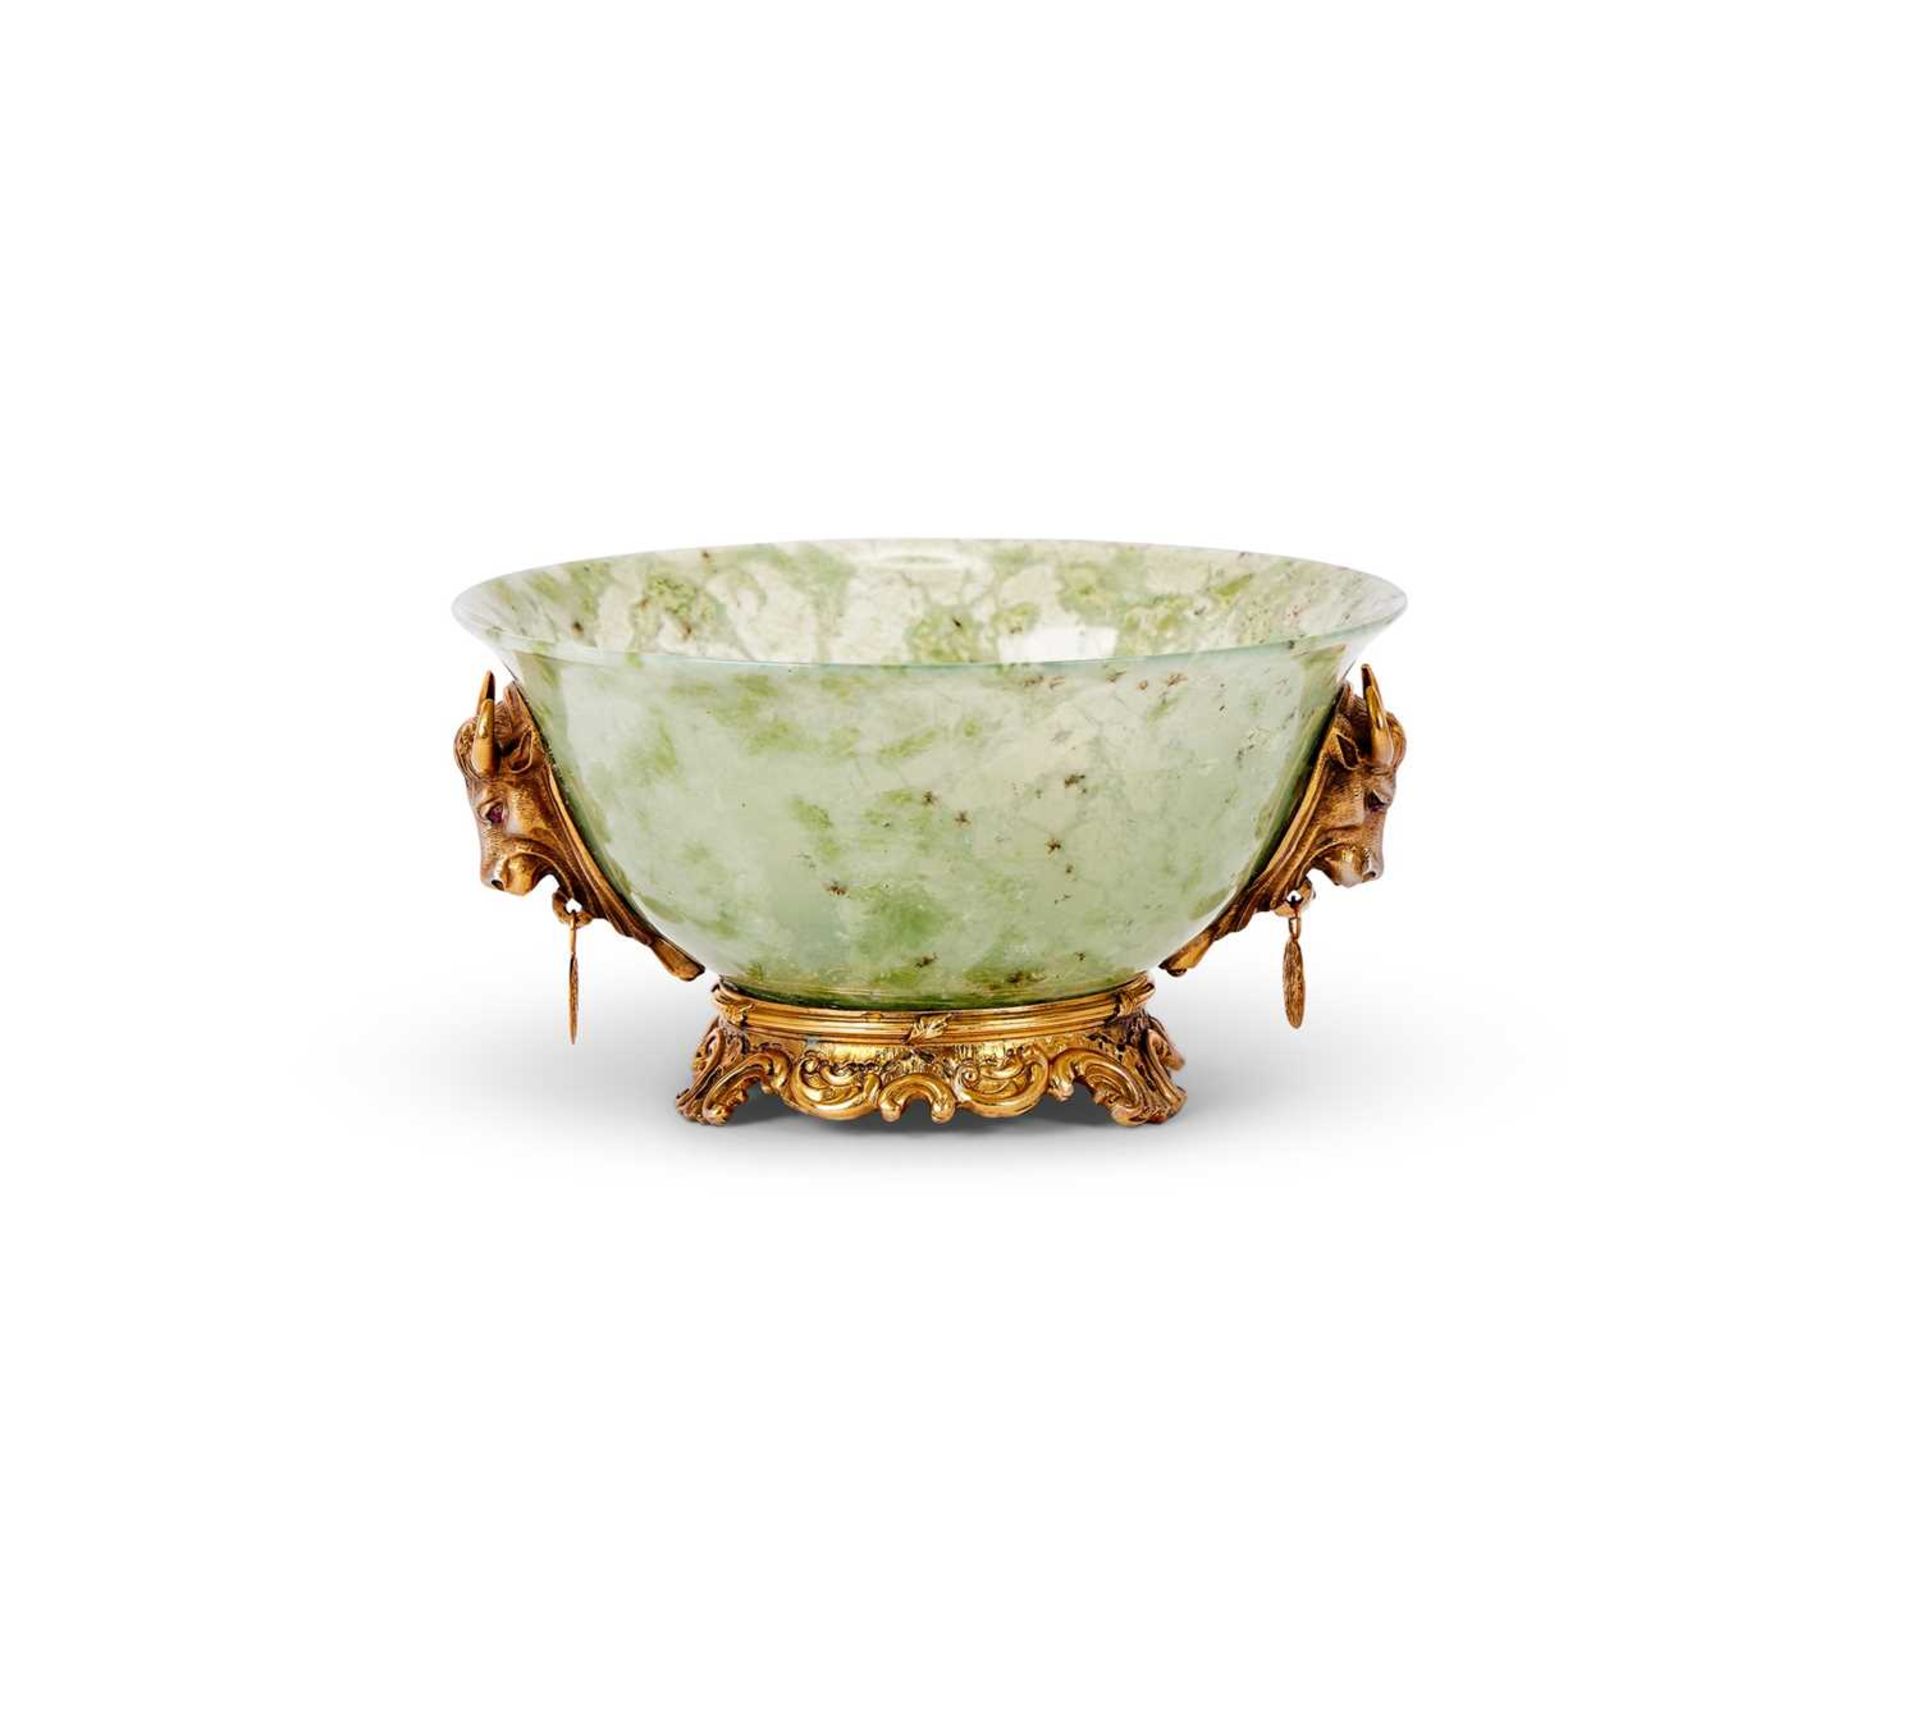 A SILVER GILT AND DIAMOND MOUNTED HARDSTONE BOWL IN THE STYLE OF FABERGE - Image 2 of 2